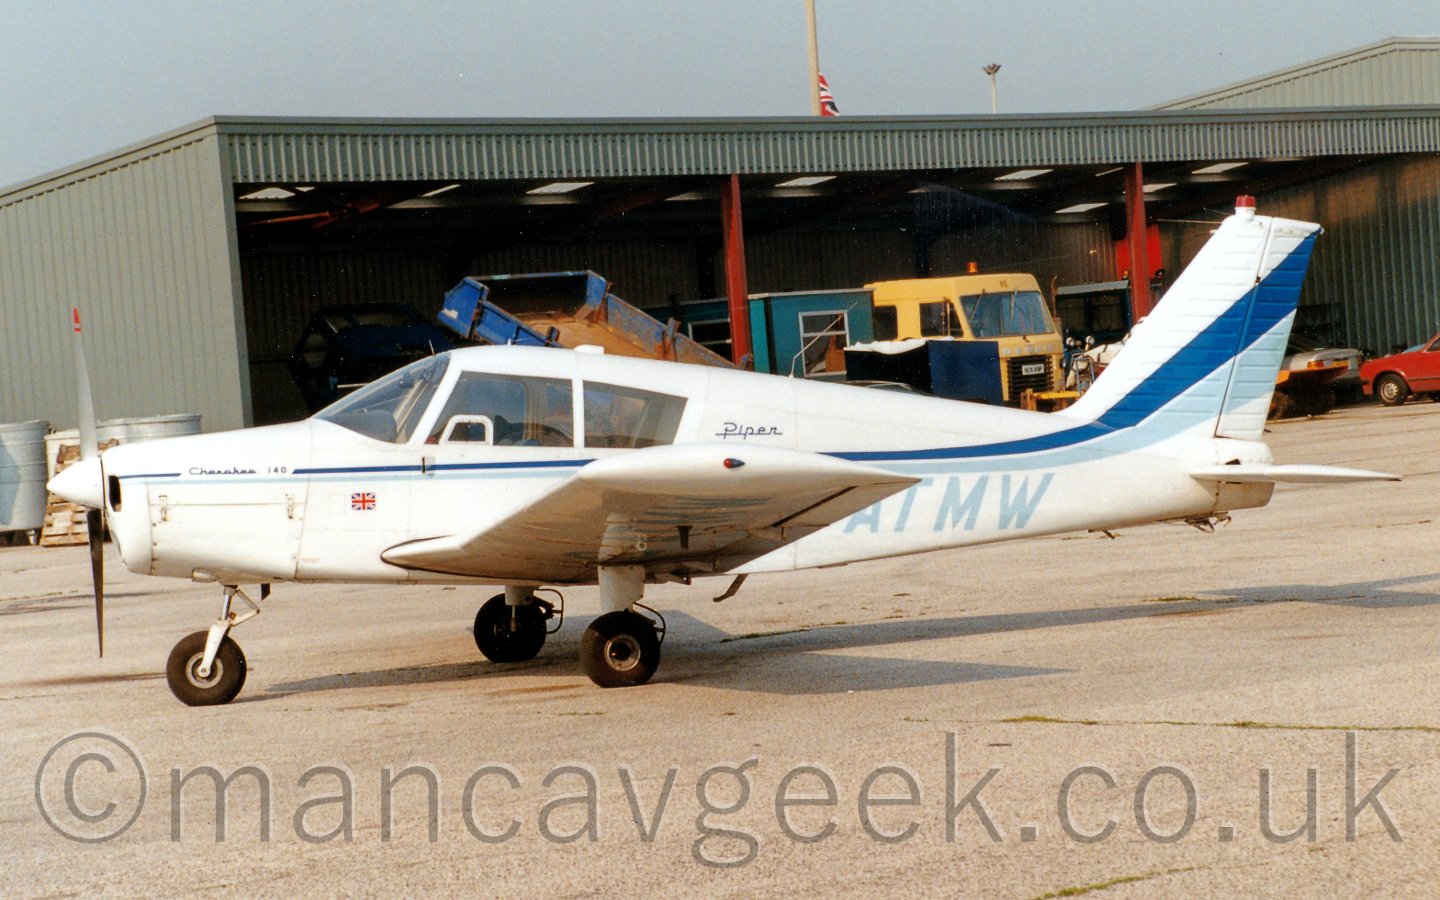 Side view of a single engined light aircraft parked facing to the left. The plane is mostly white, with a light and dark blue stripe runnning along the fuselage and sweeping up in to the tail.behind is a large grey metal shed with several vehicles and a cabin parked inside. The sky above is a light grey.